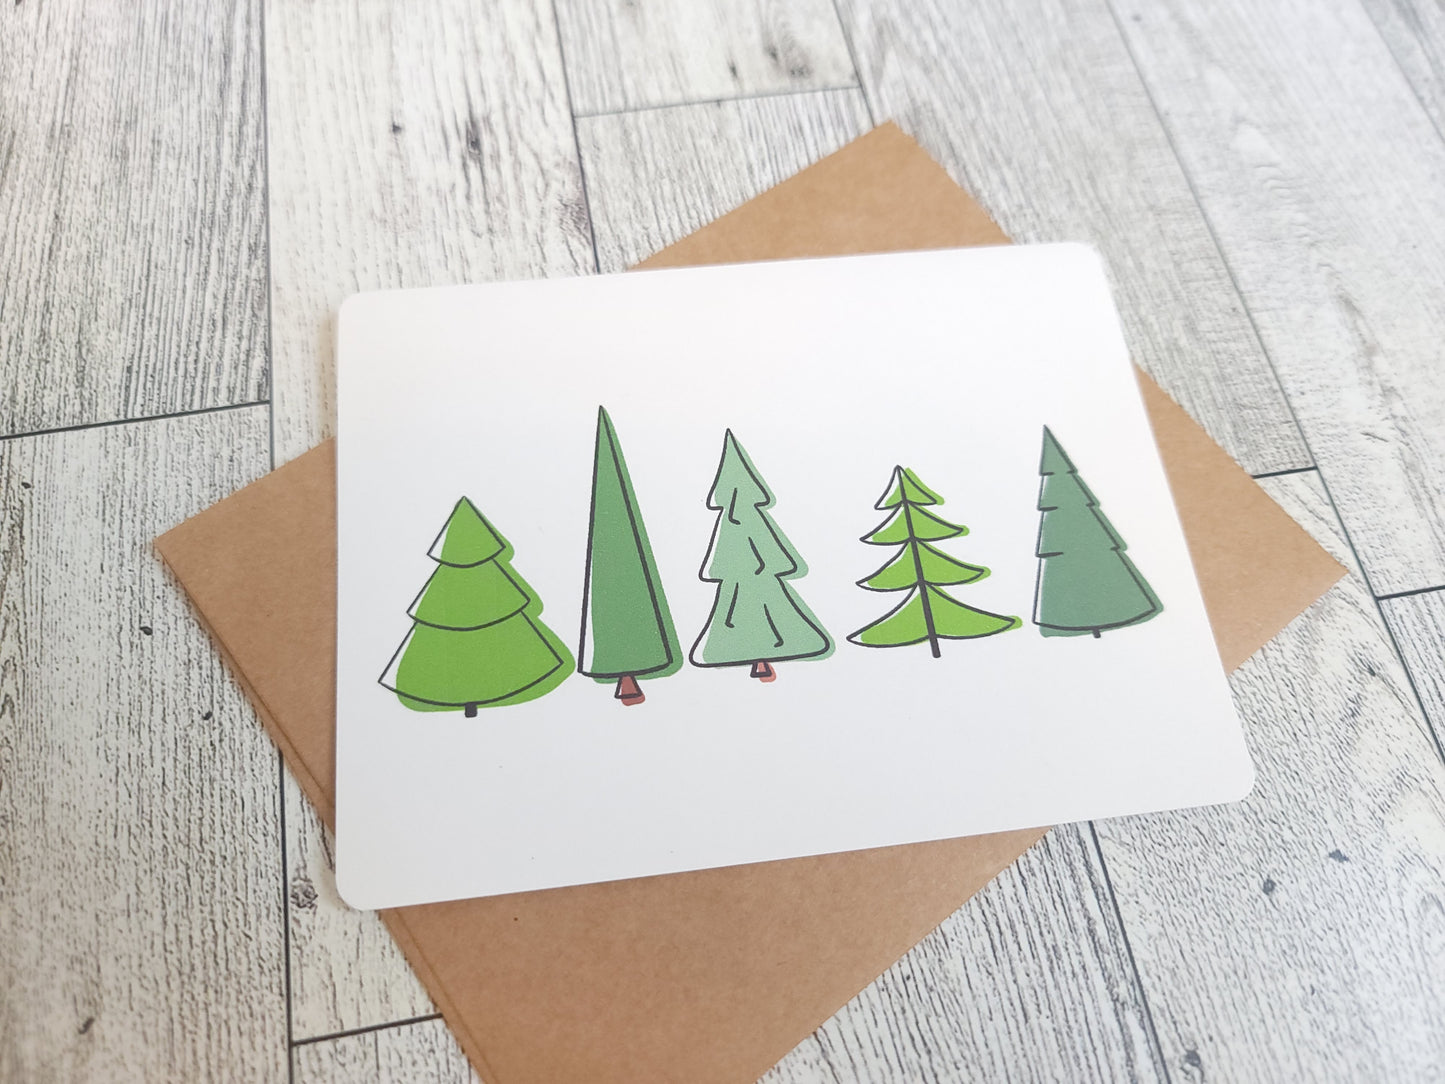 Pine Trees Handmade Greeting Card - Recycled Paper and Kraft Envelop - Overhead Shot 2